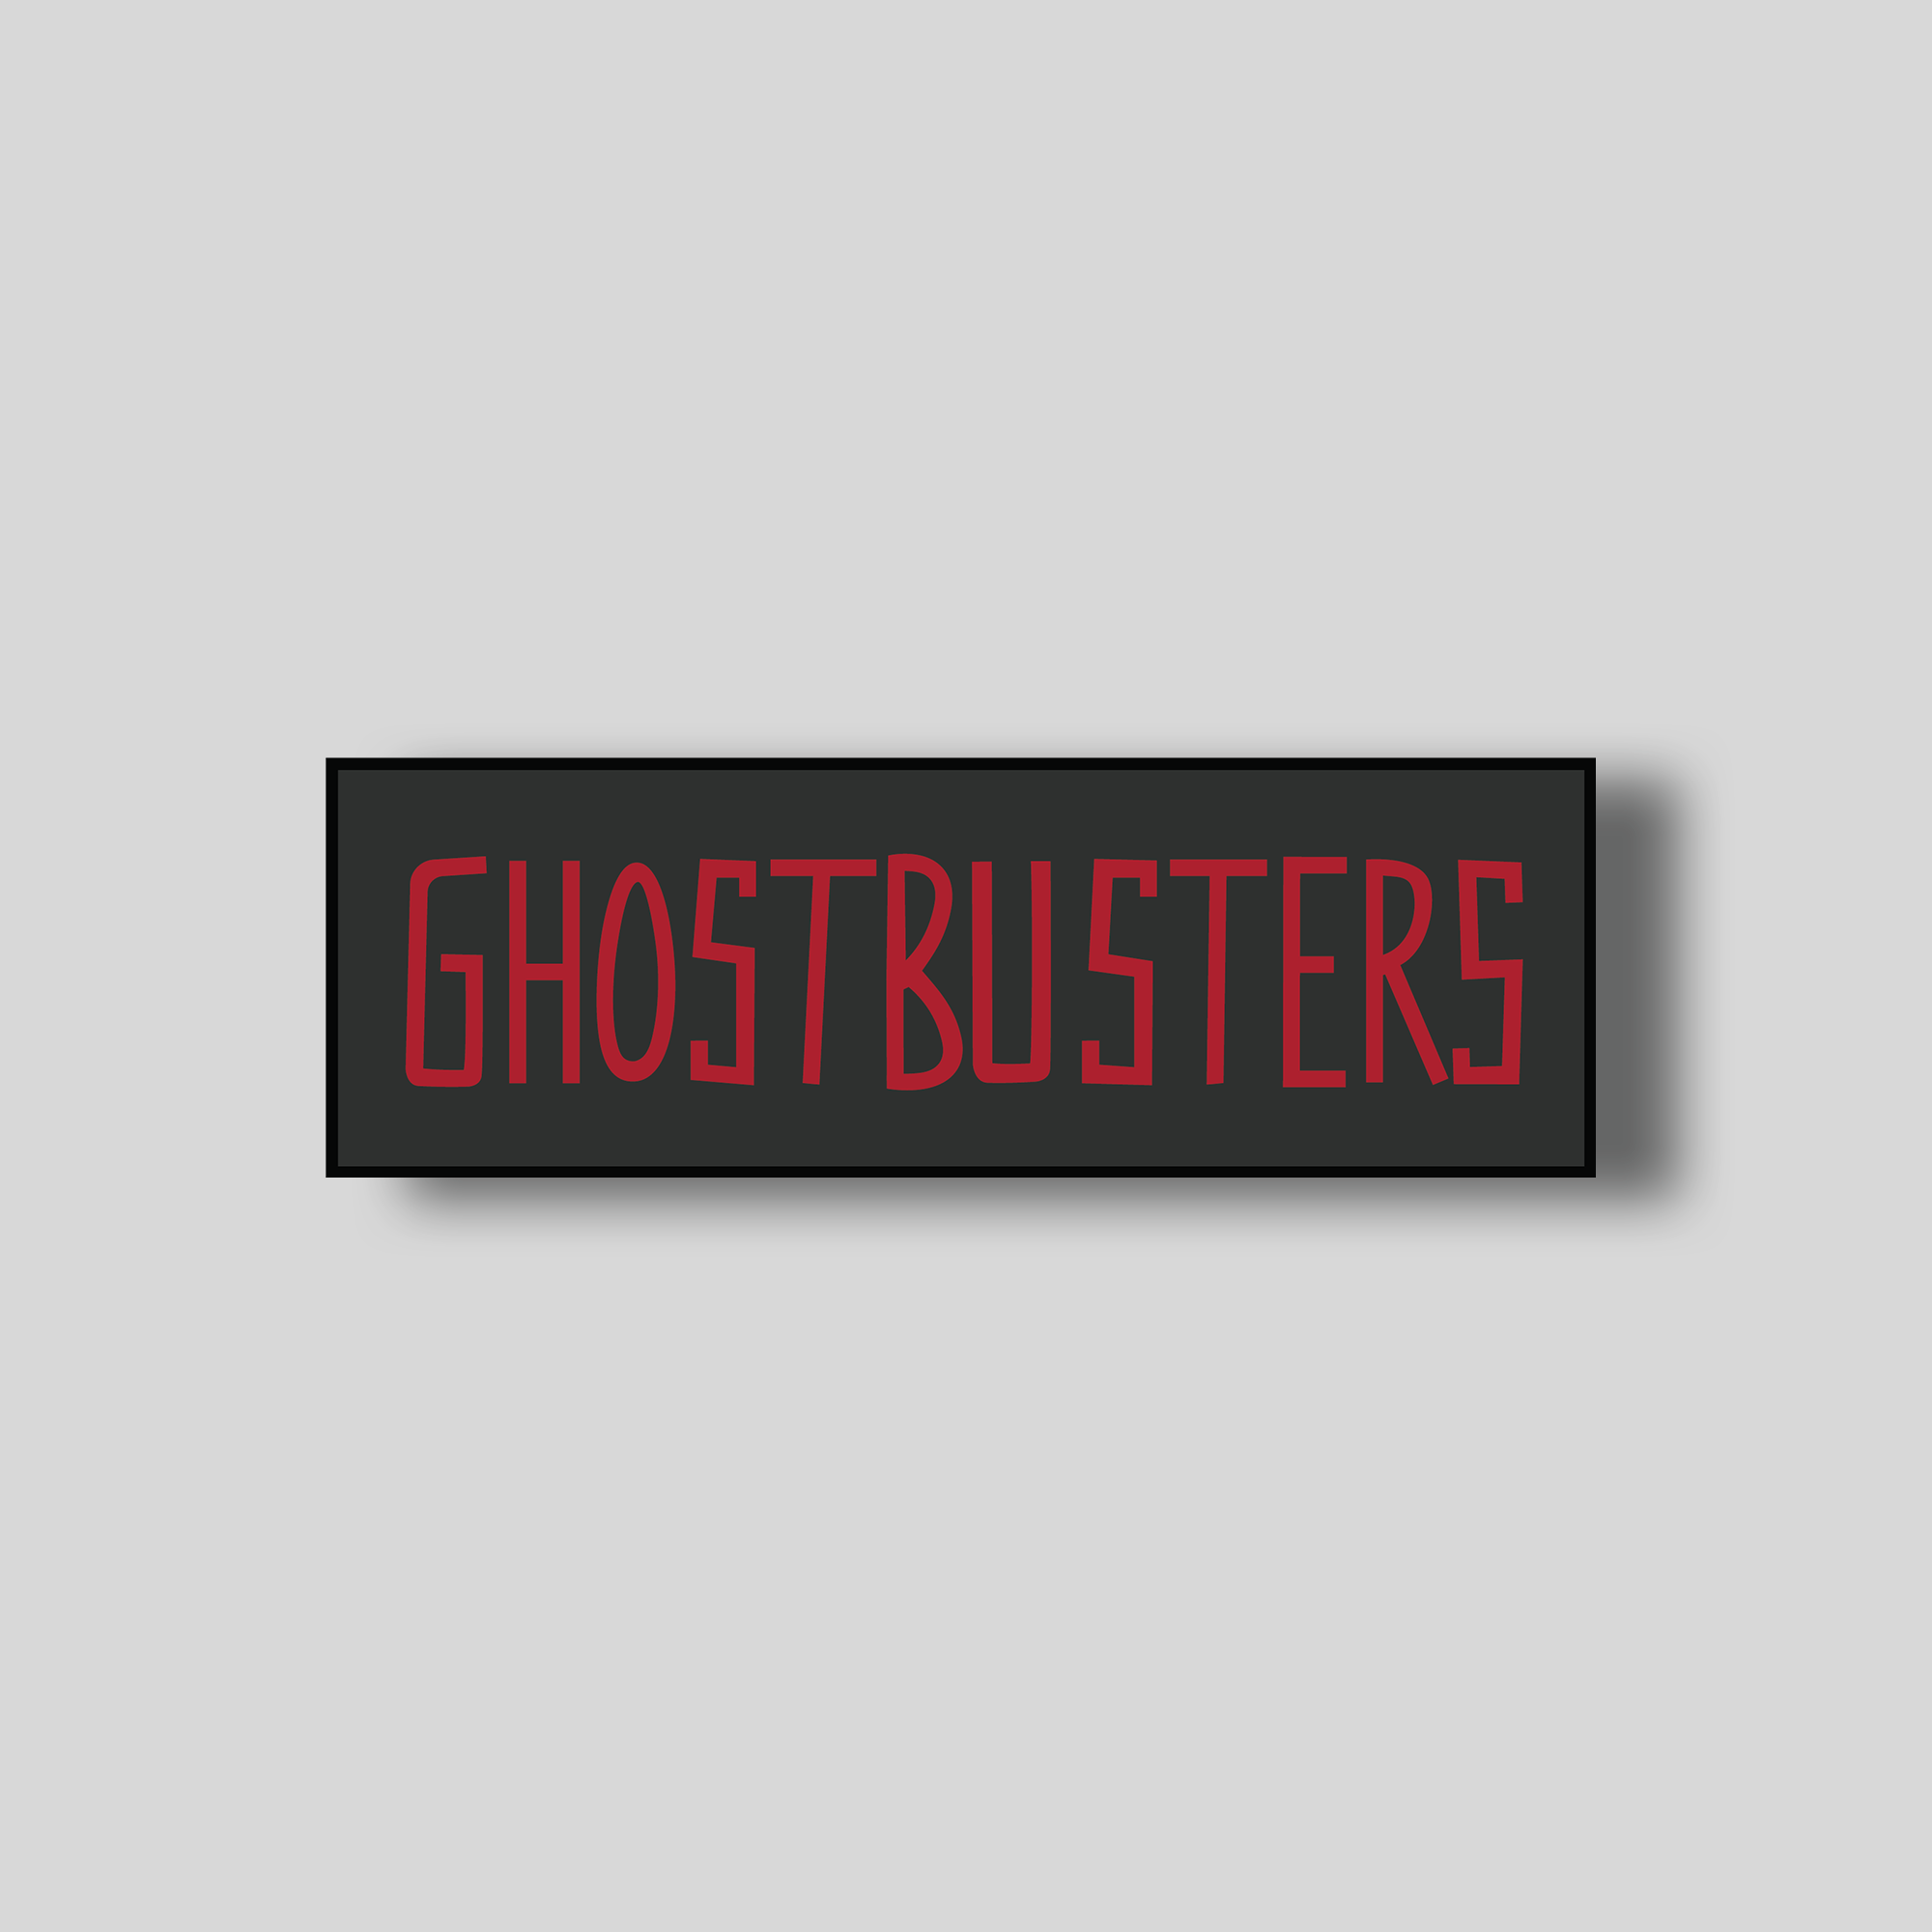 Ghostbusters-ShopifyImages-Patches-GB-R4_1f0a1ce5-db95-488d-a03c-73c71c870d72.png